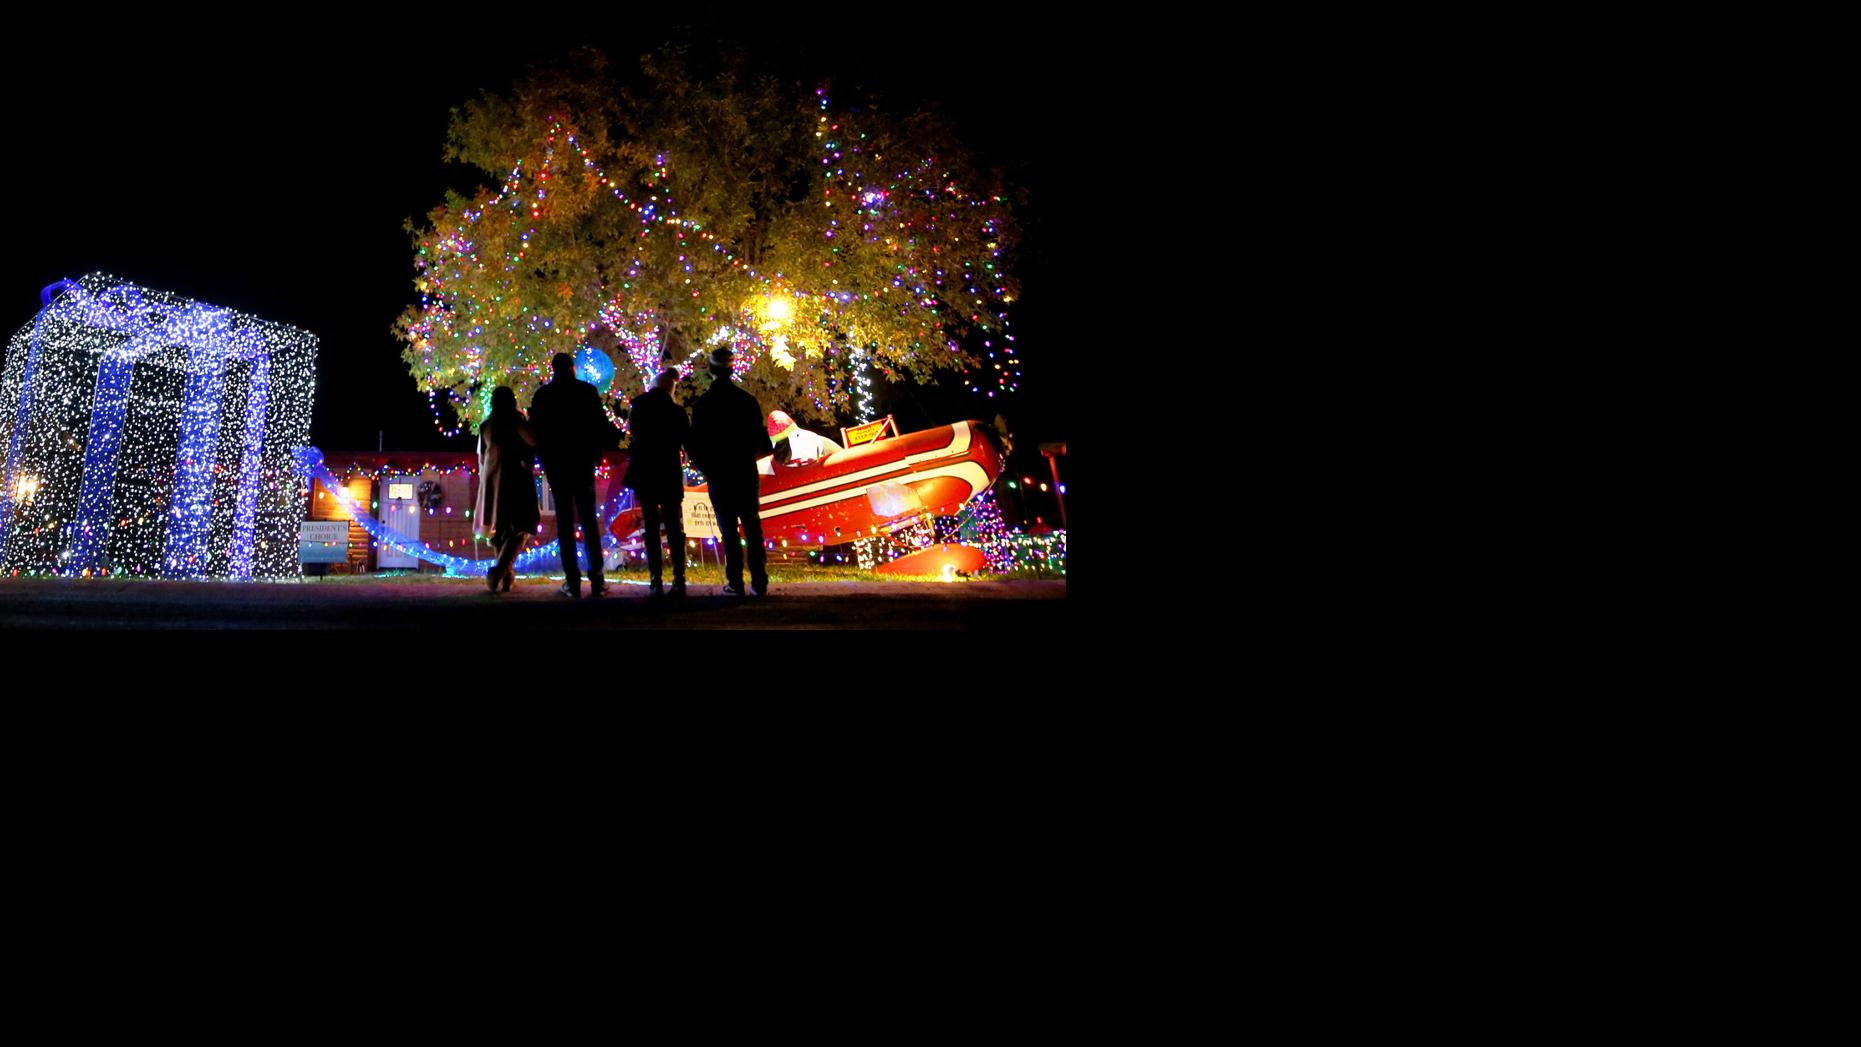 Tucson's Winterhaven Festival of Lights canceled this year due to COVID19